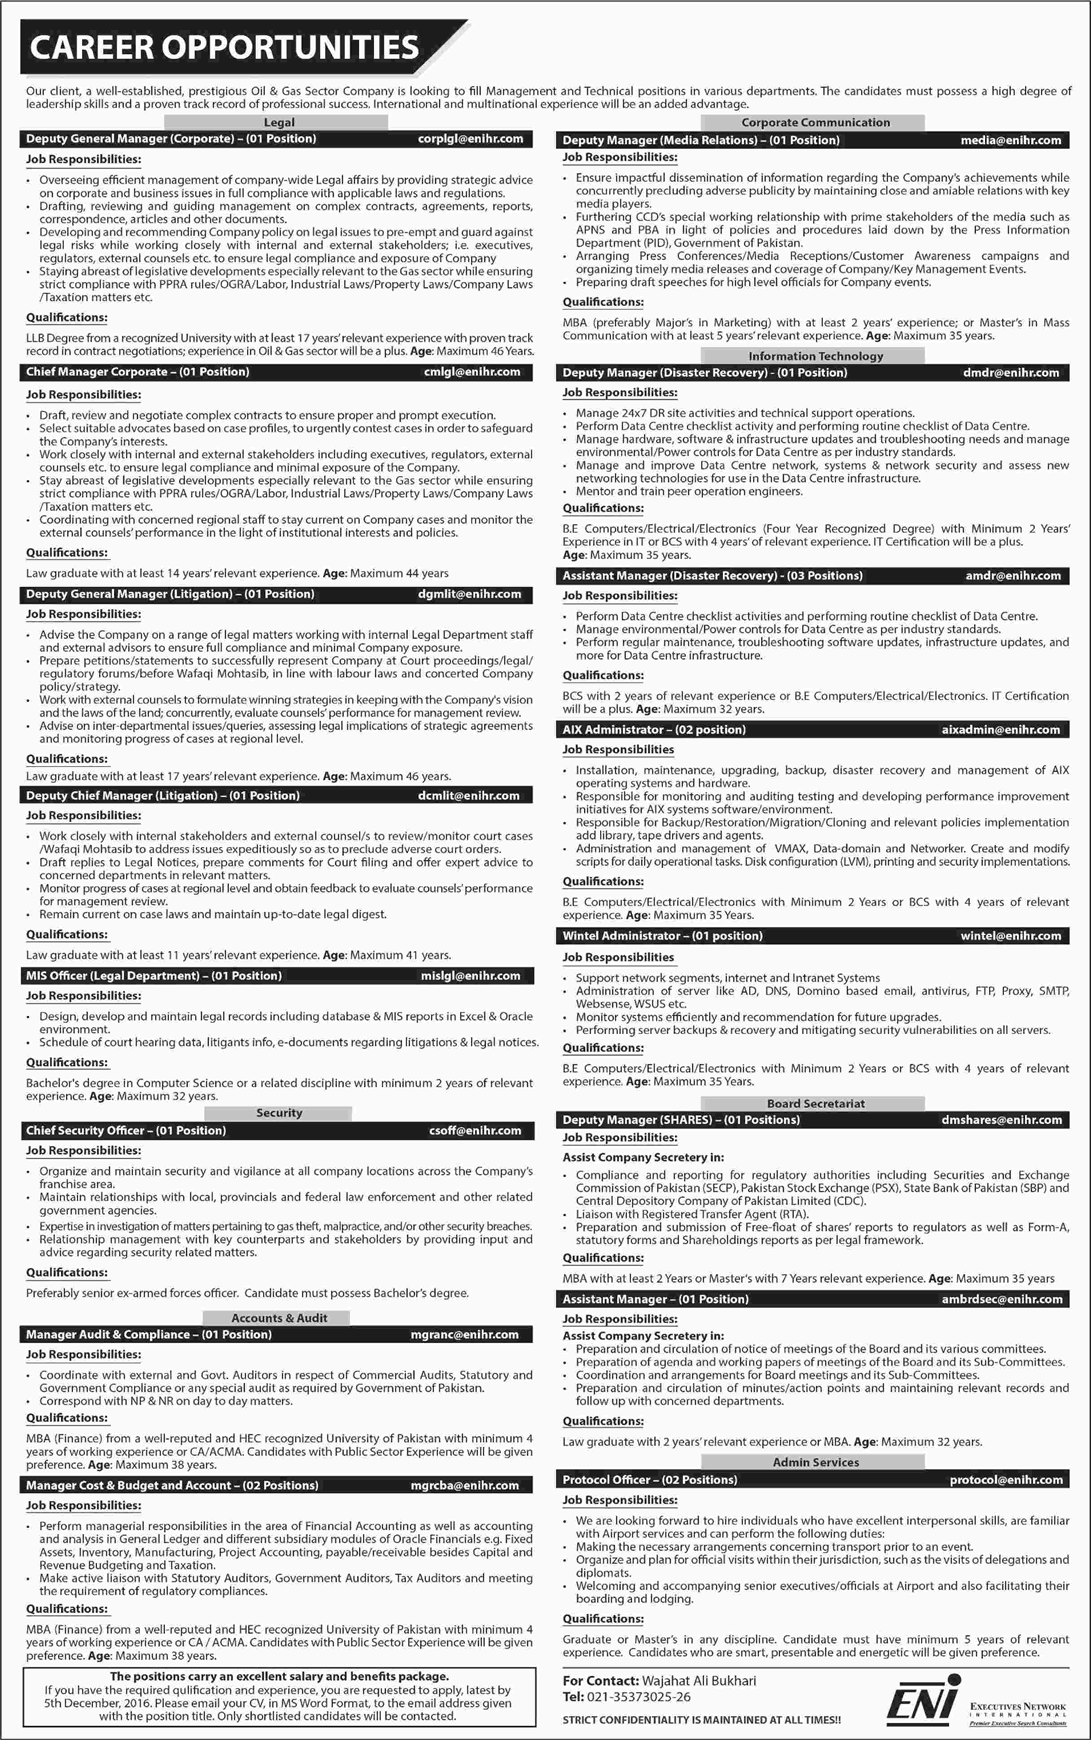 ENI Pakistan Jobs November 2016 Managers, Protocol Officers & Others at Oil & Gas Sector Company Latest